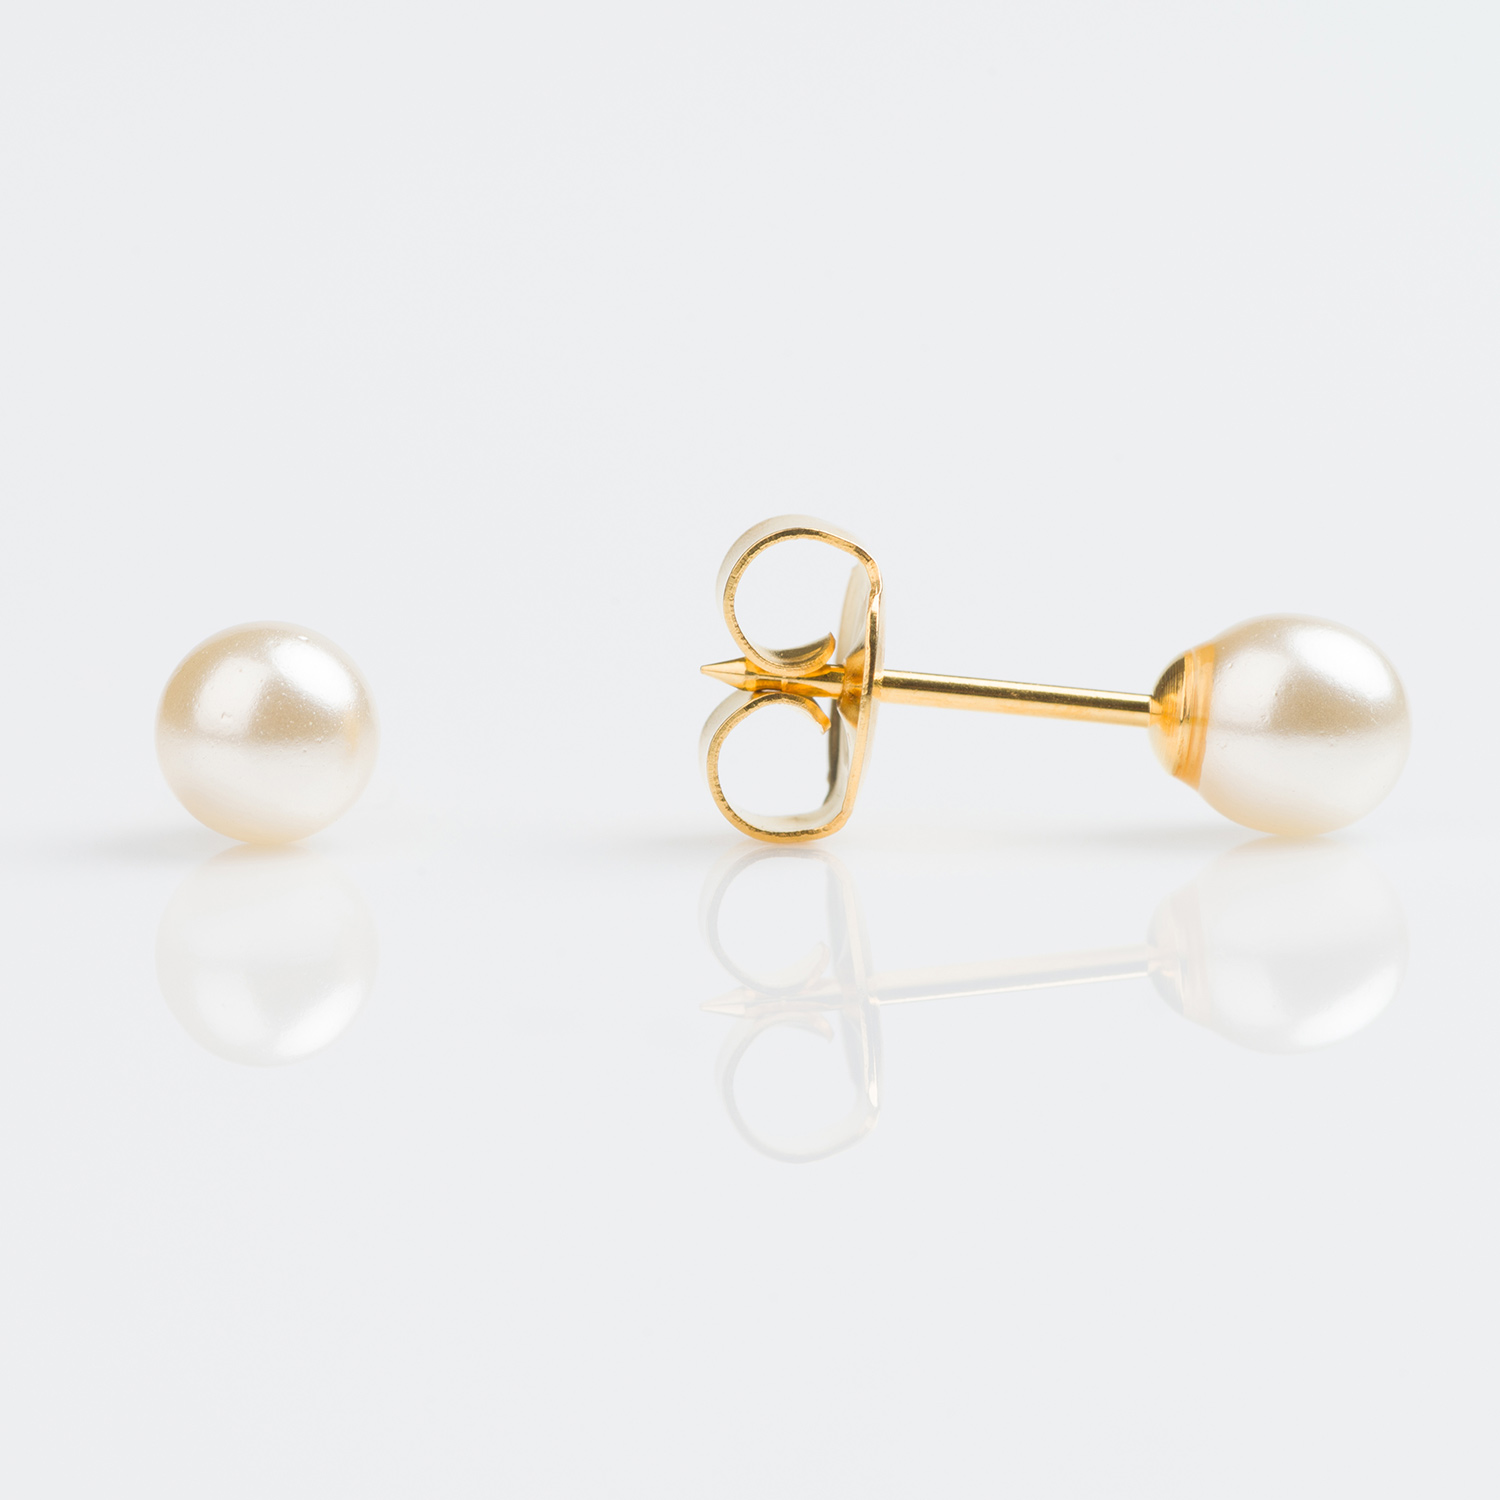 Hypoallergenic Sensitive Studex Gold Plated 5mm White Pearl Stud